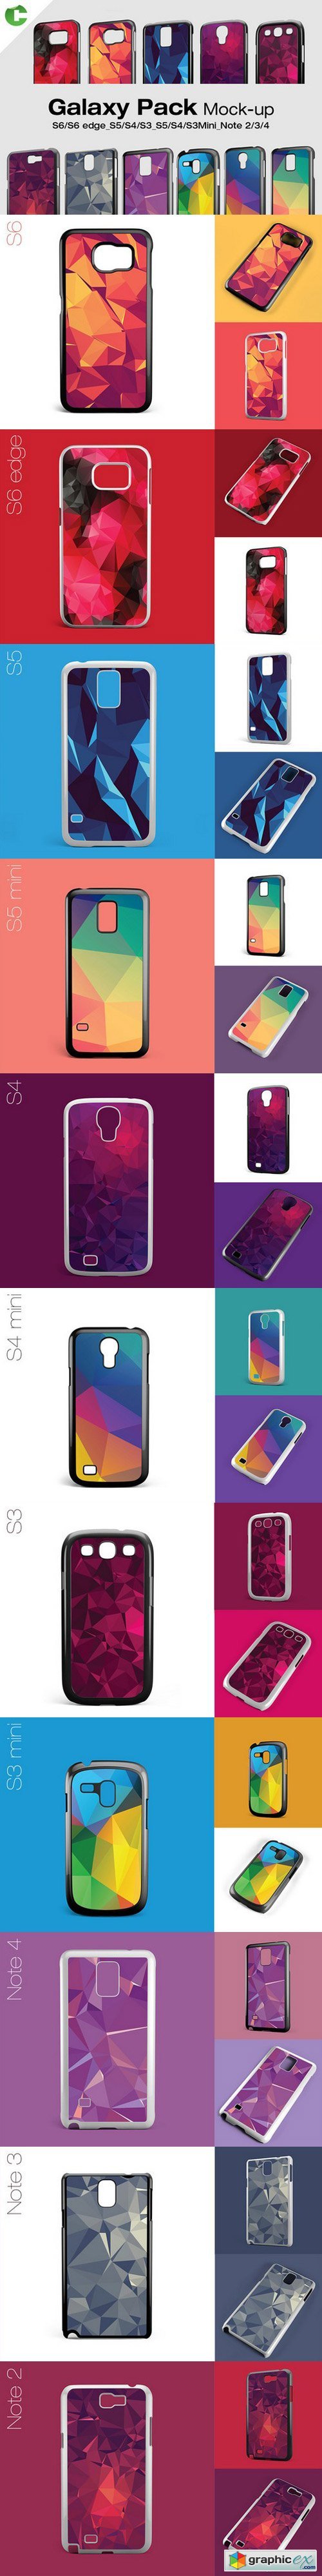 Galaxy Pack Case Mock-Up